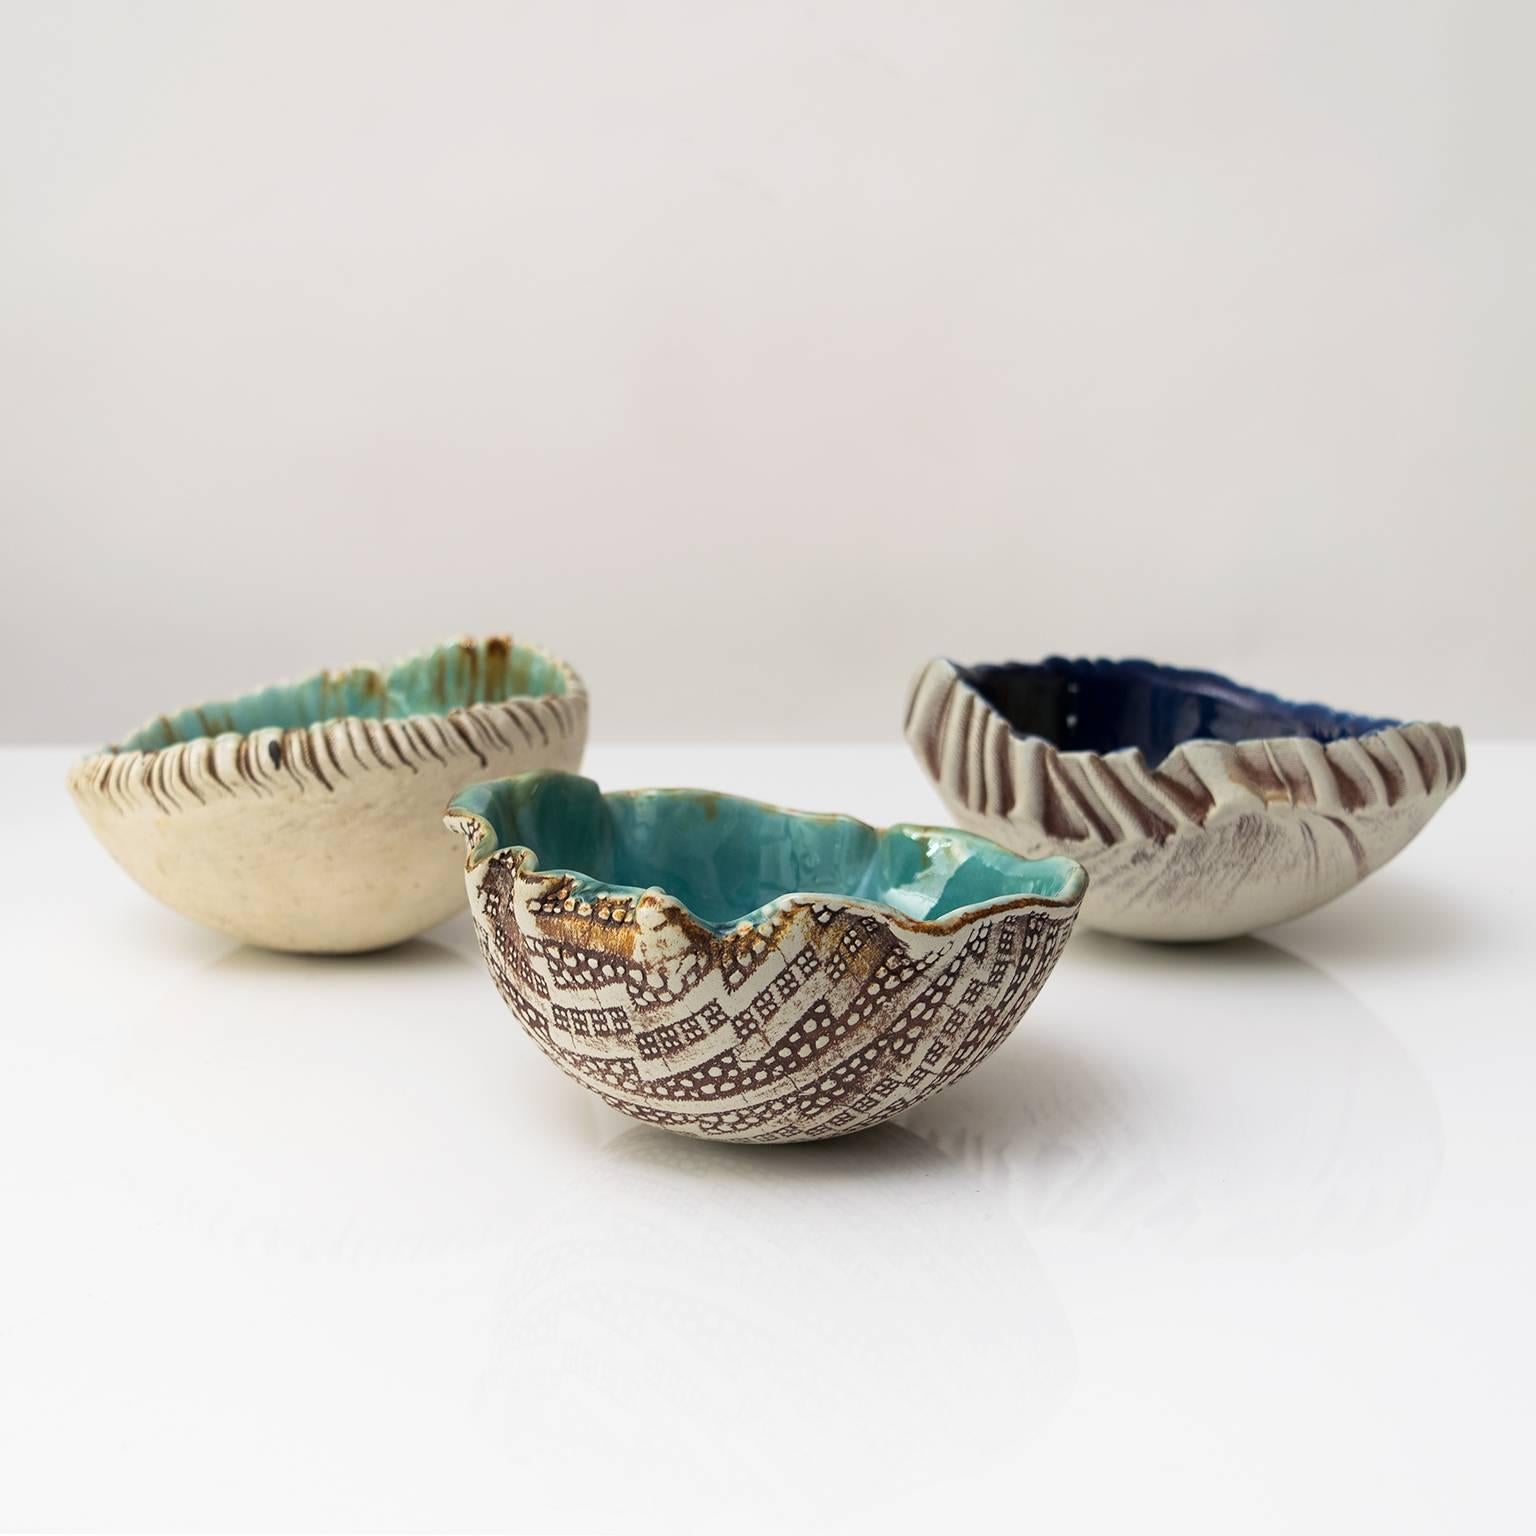 Three unique Scandinavian Modern hand built and glazed bowls by artist Bengt Berglund for Gustavsberg studio 1960-1977. The exterior of the bowls are partially glazed while the interiors are pale to dark blue-greens and yellow-greens glazes.
